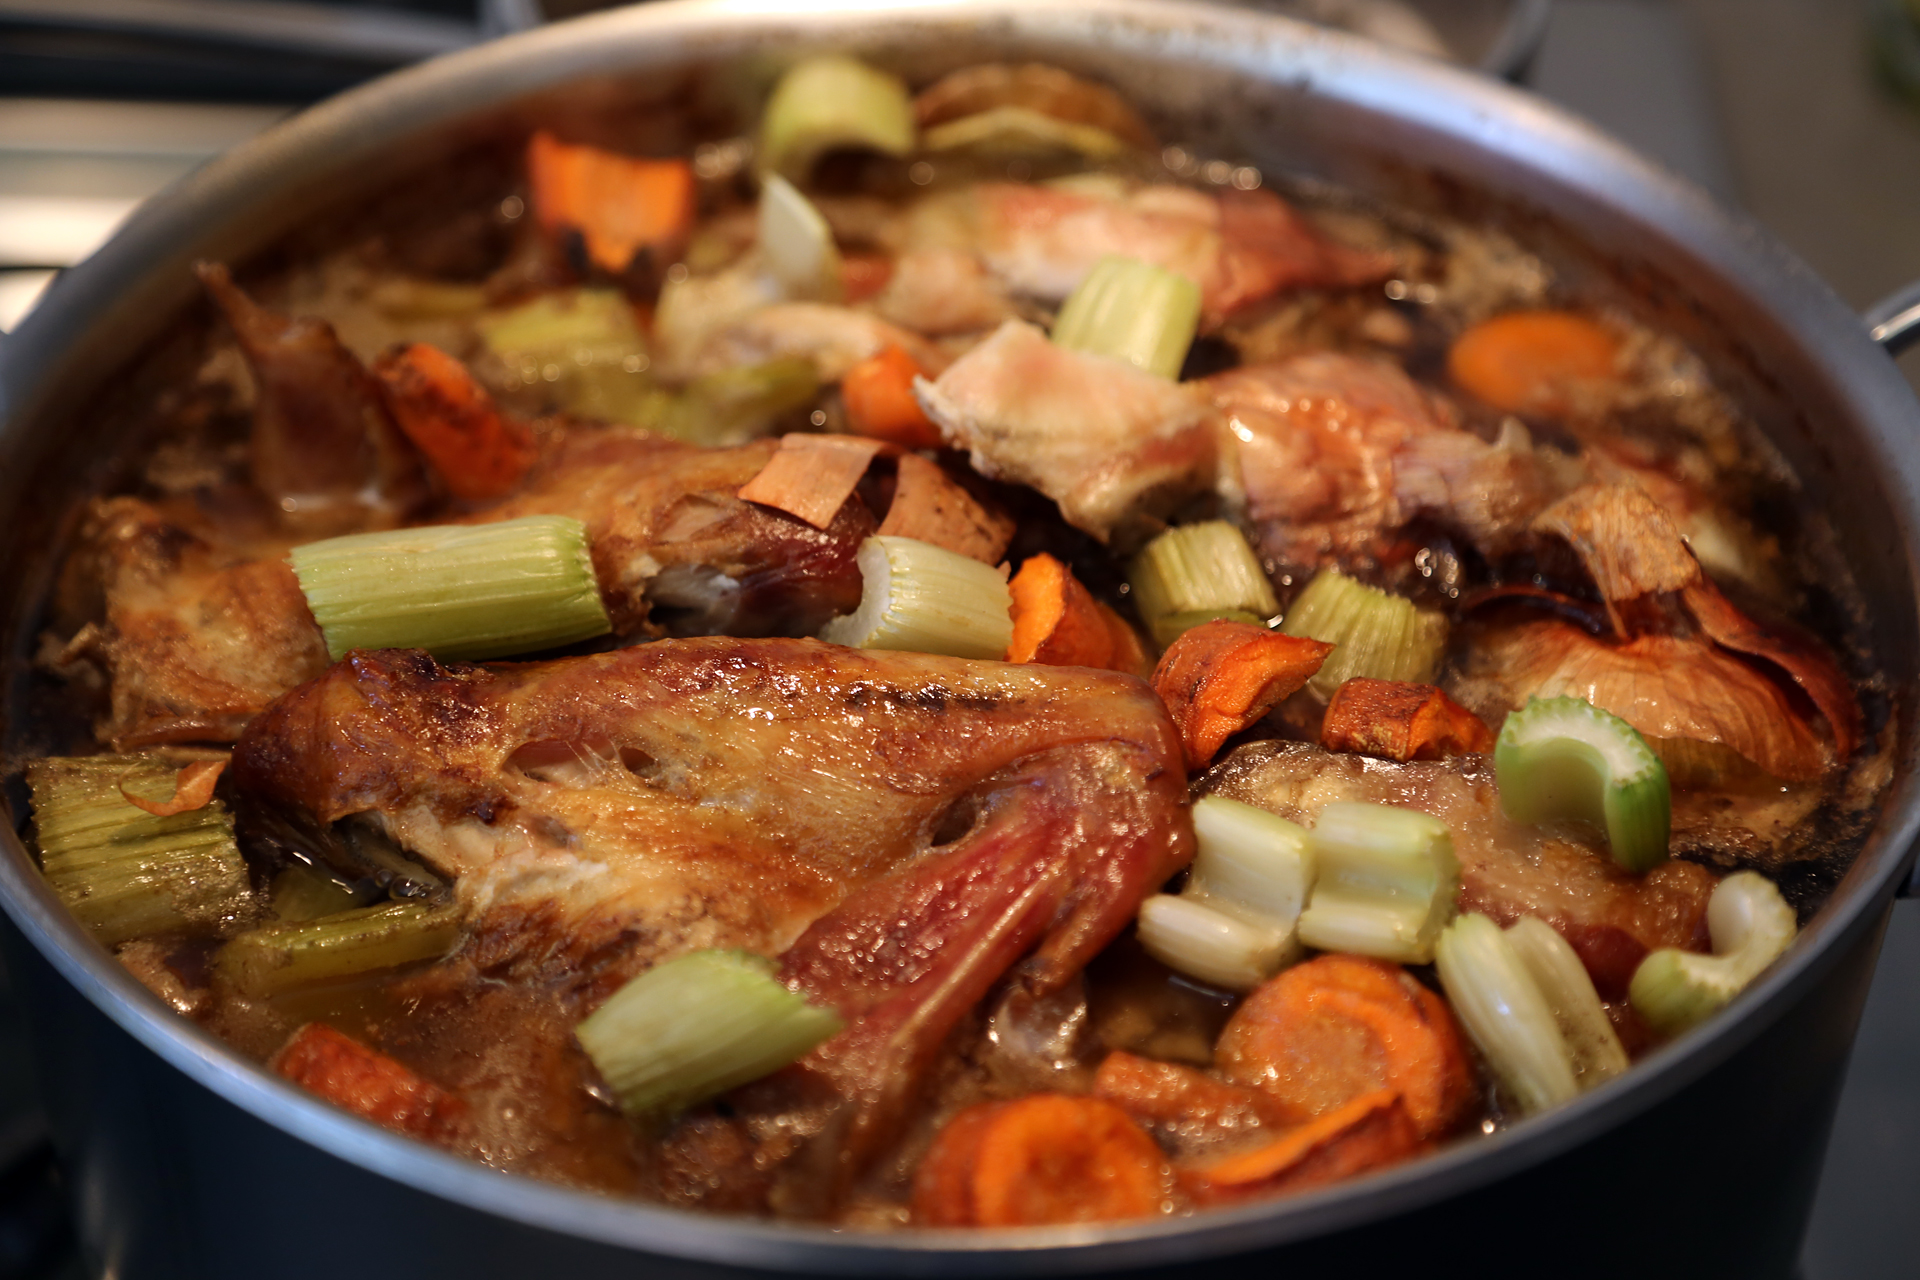 Reduce the heat to low and let simmer, partially covered, for 3 hours.